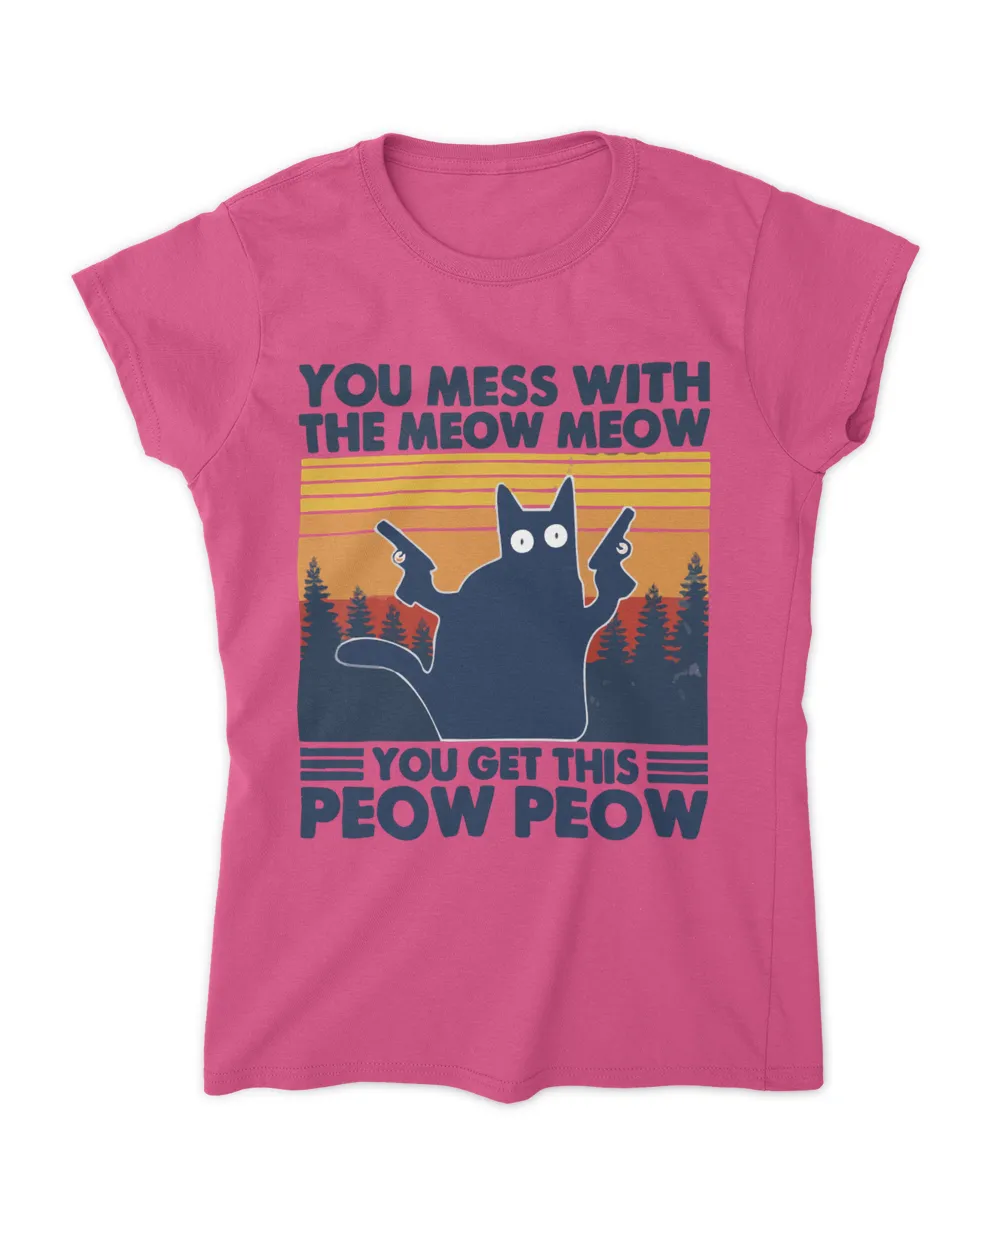 You mess with the meow meow